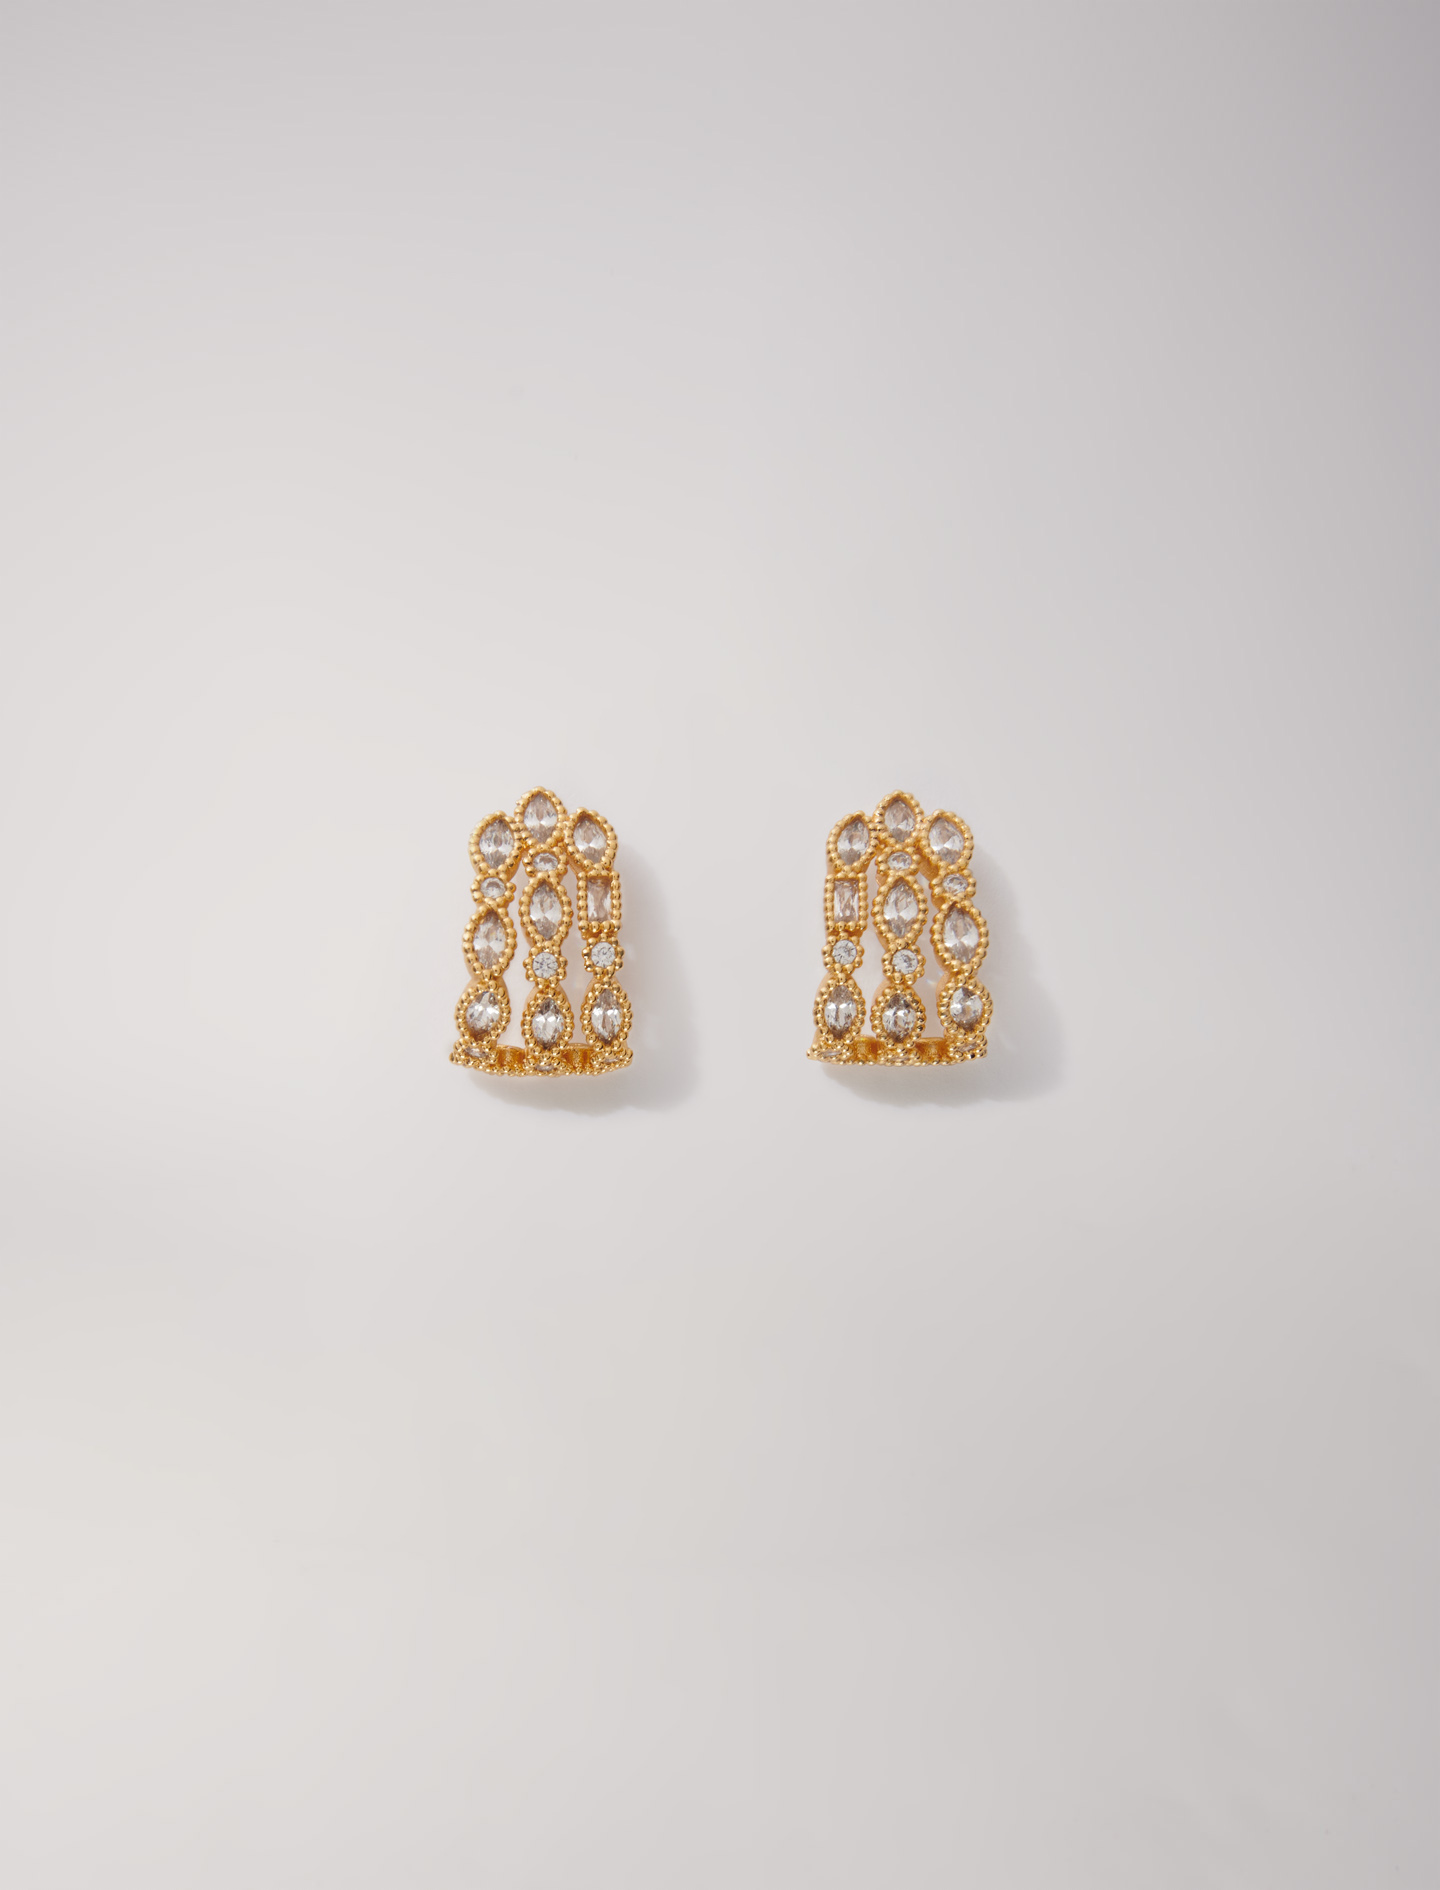 Woman's zirconium oxide Jewellery: Rhinestone earrings for Fall/Winter, size Woman-Jewelry-OS (ONE SIZE), in color Gold / Yellow